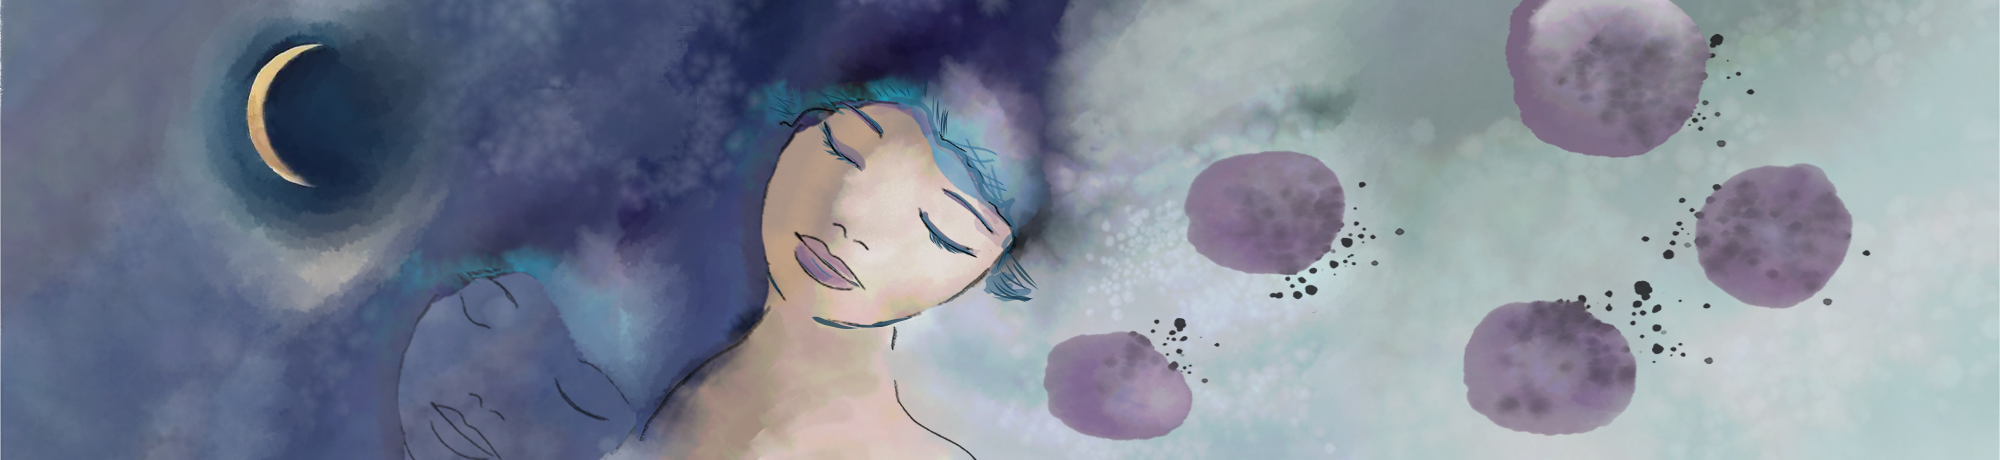 Illustration of woman dreaming